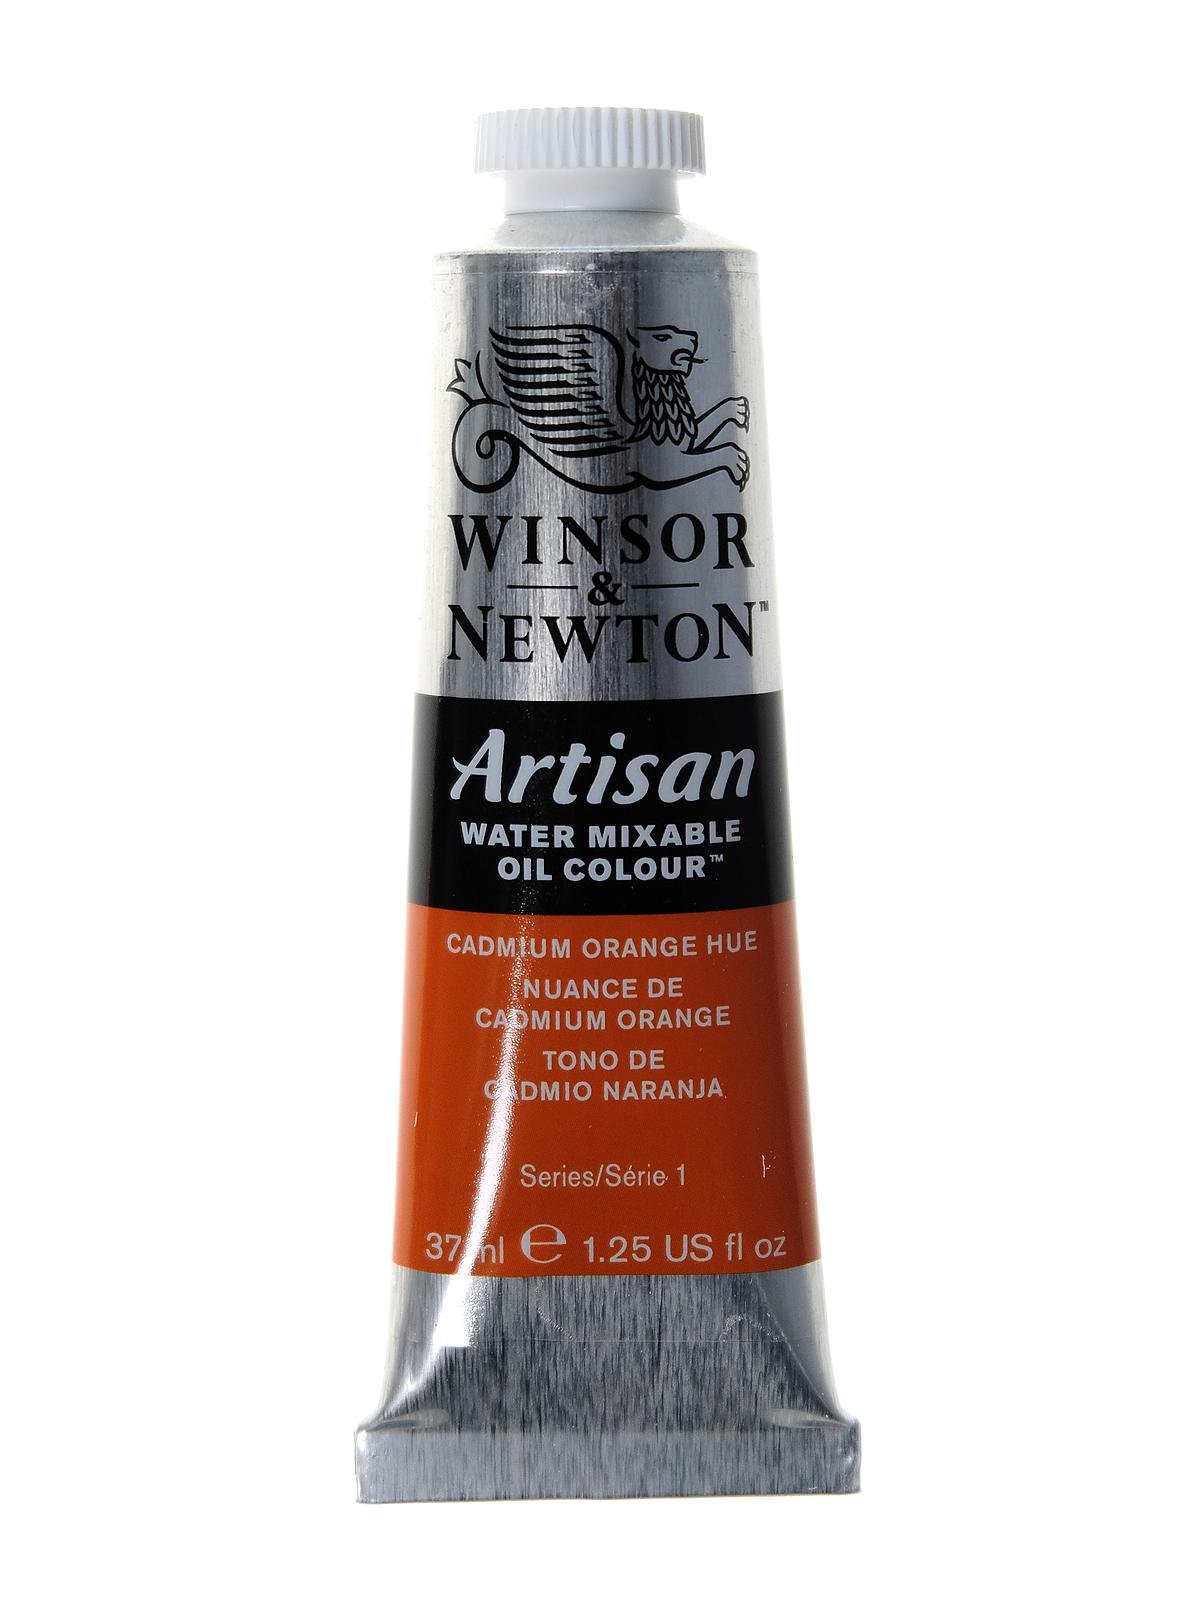 Winsor & Newton Artisan Water Mixable Oil Color Paint, Series 1, 37ml Tube